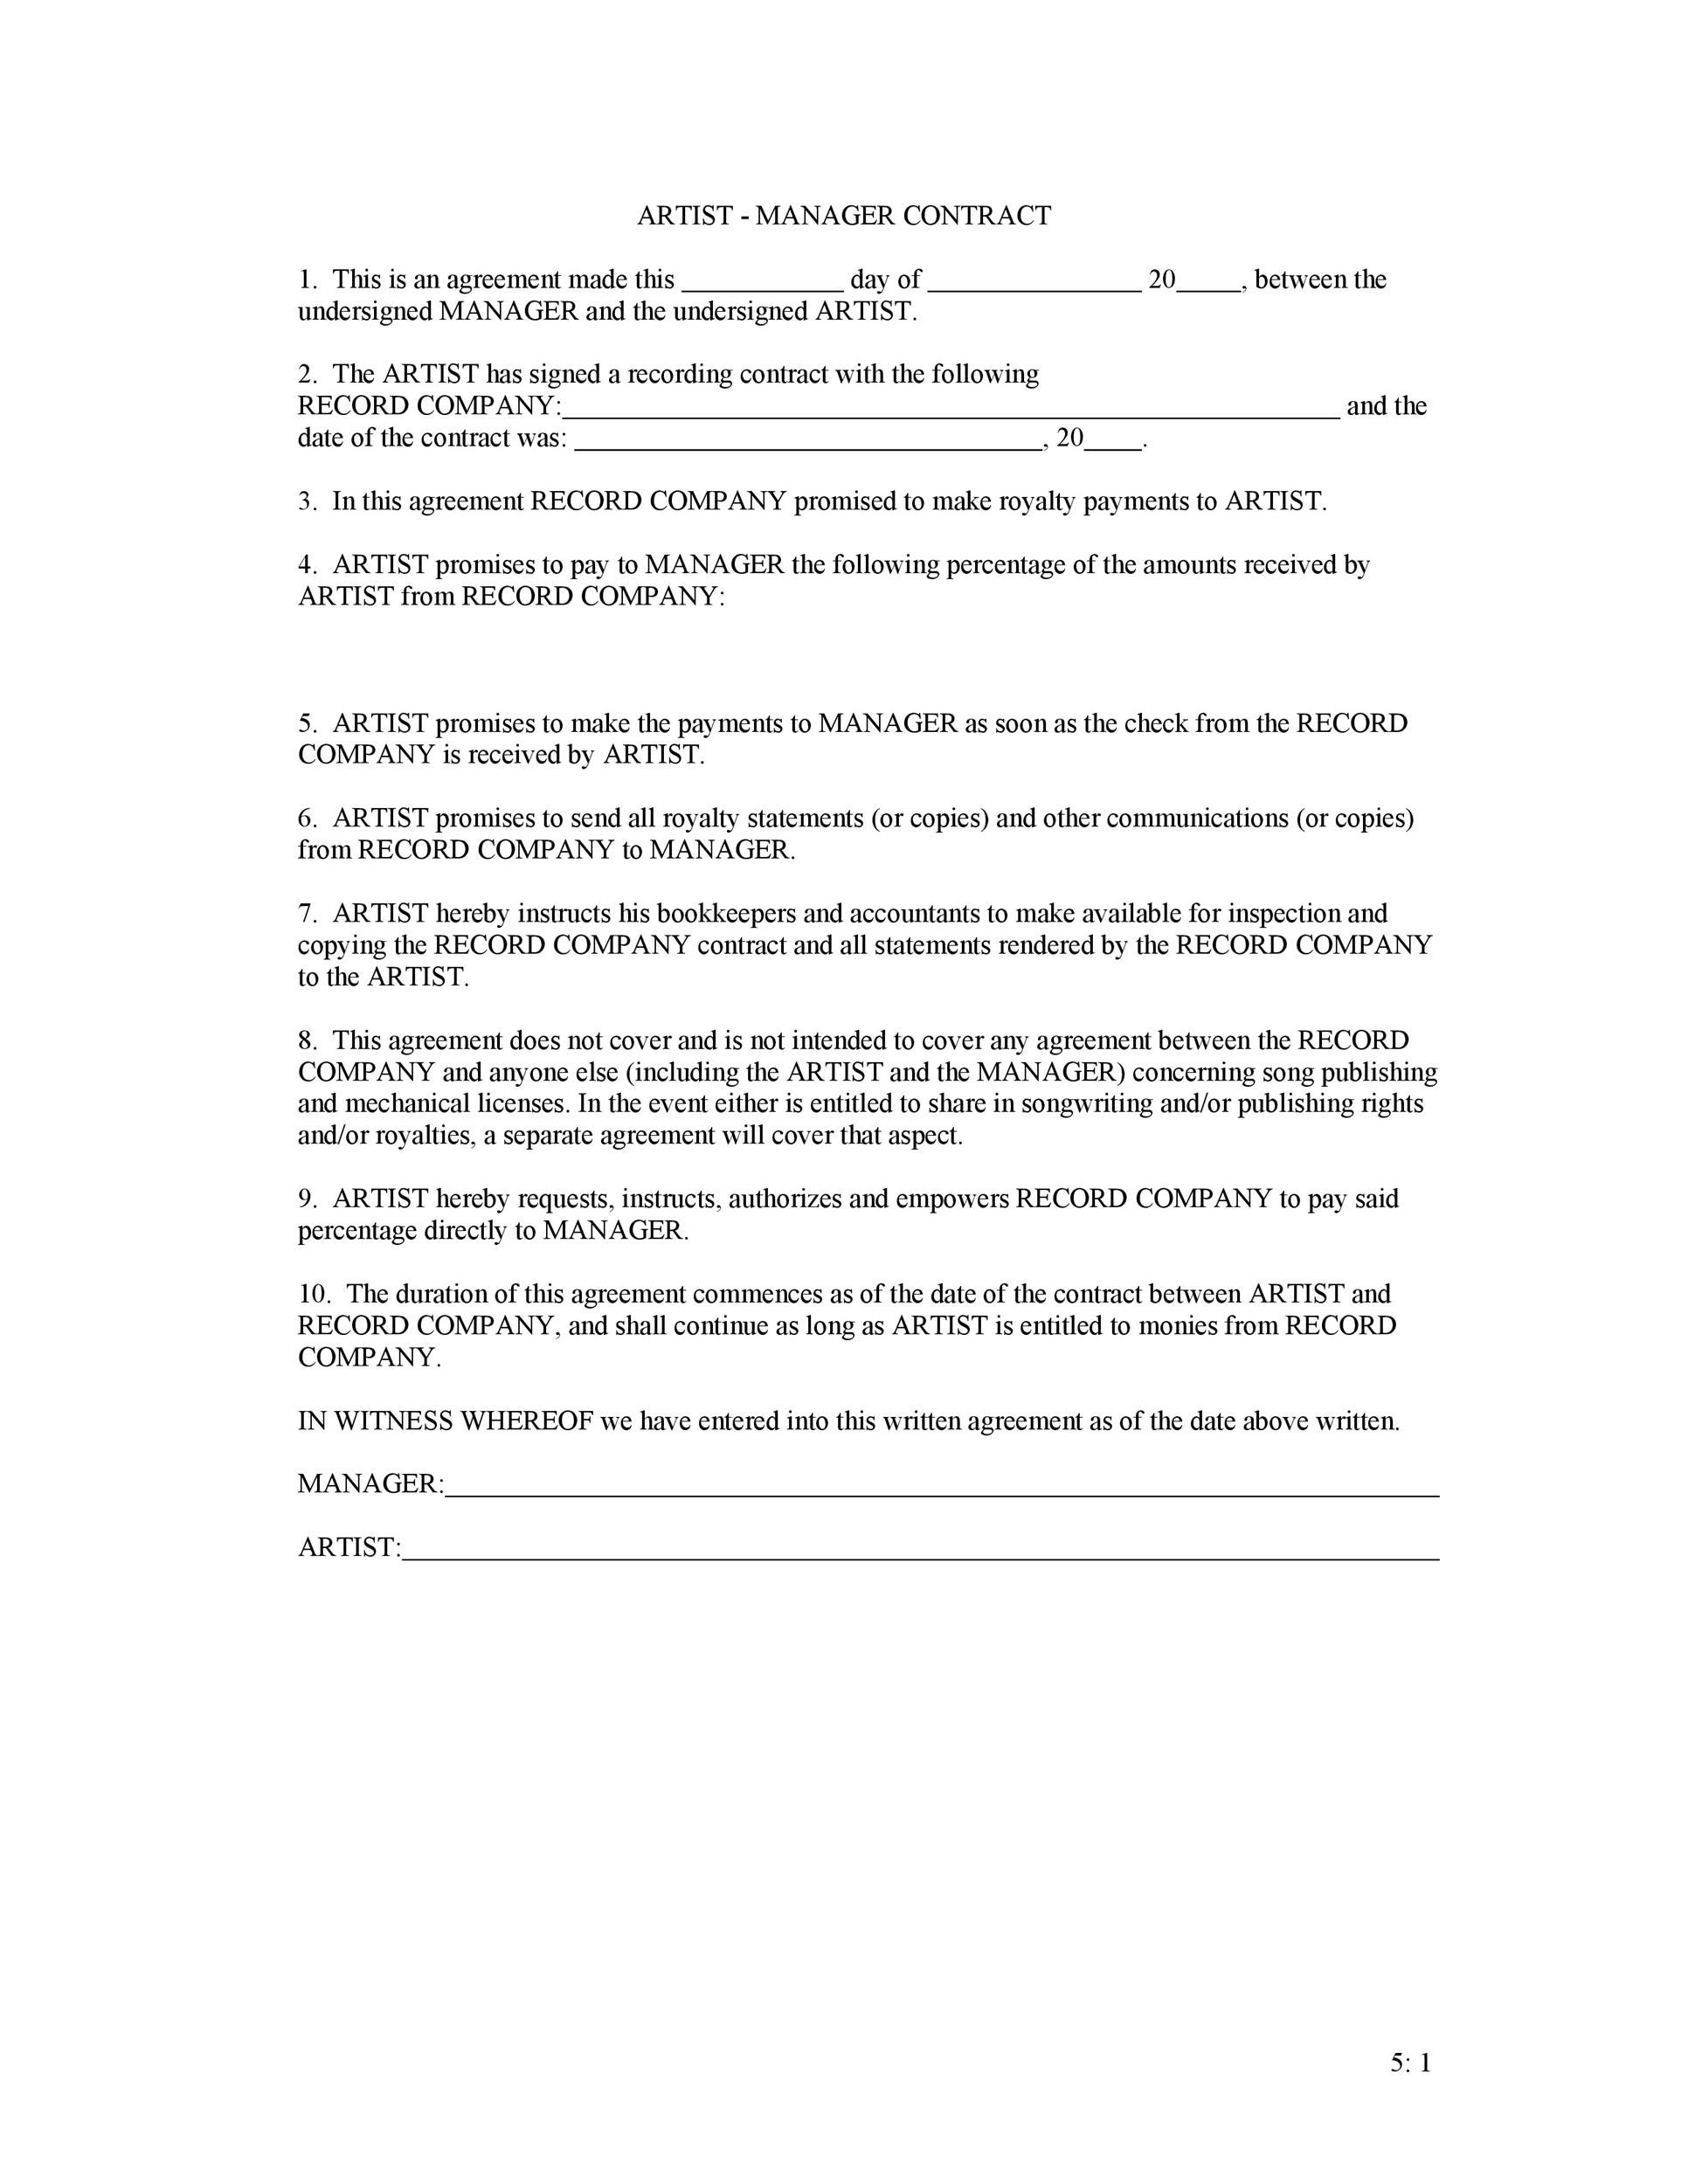 Free artist management contract 23